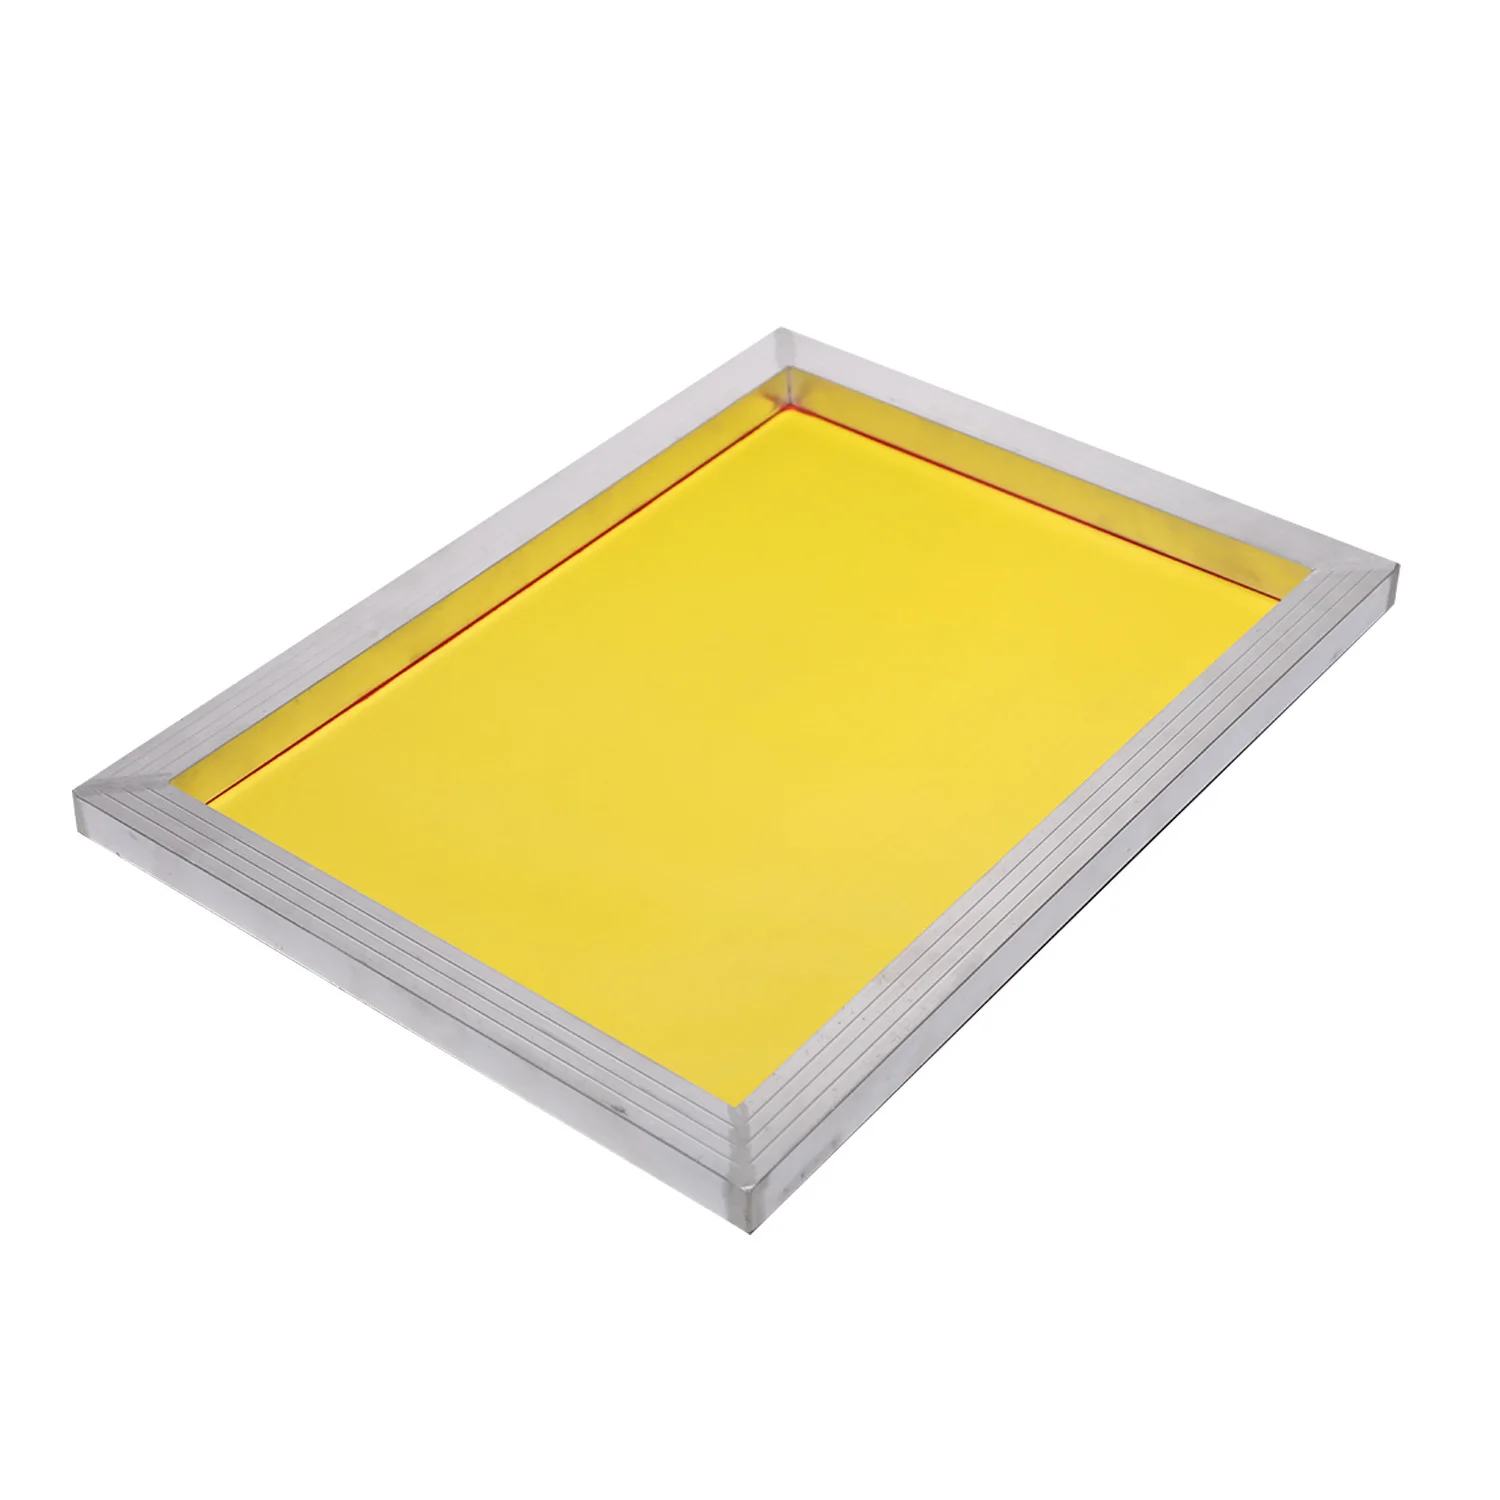 Silk Screen Printing Frame with Mesh for Textile Screen Printing (1600522707631)